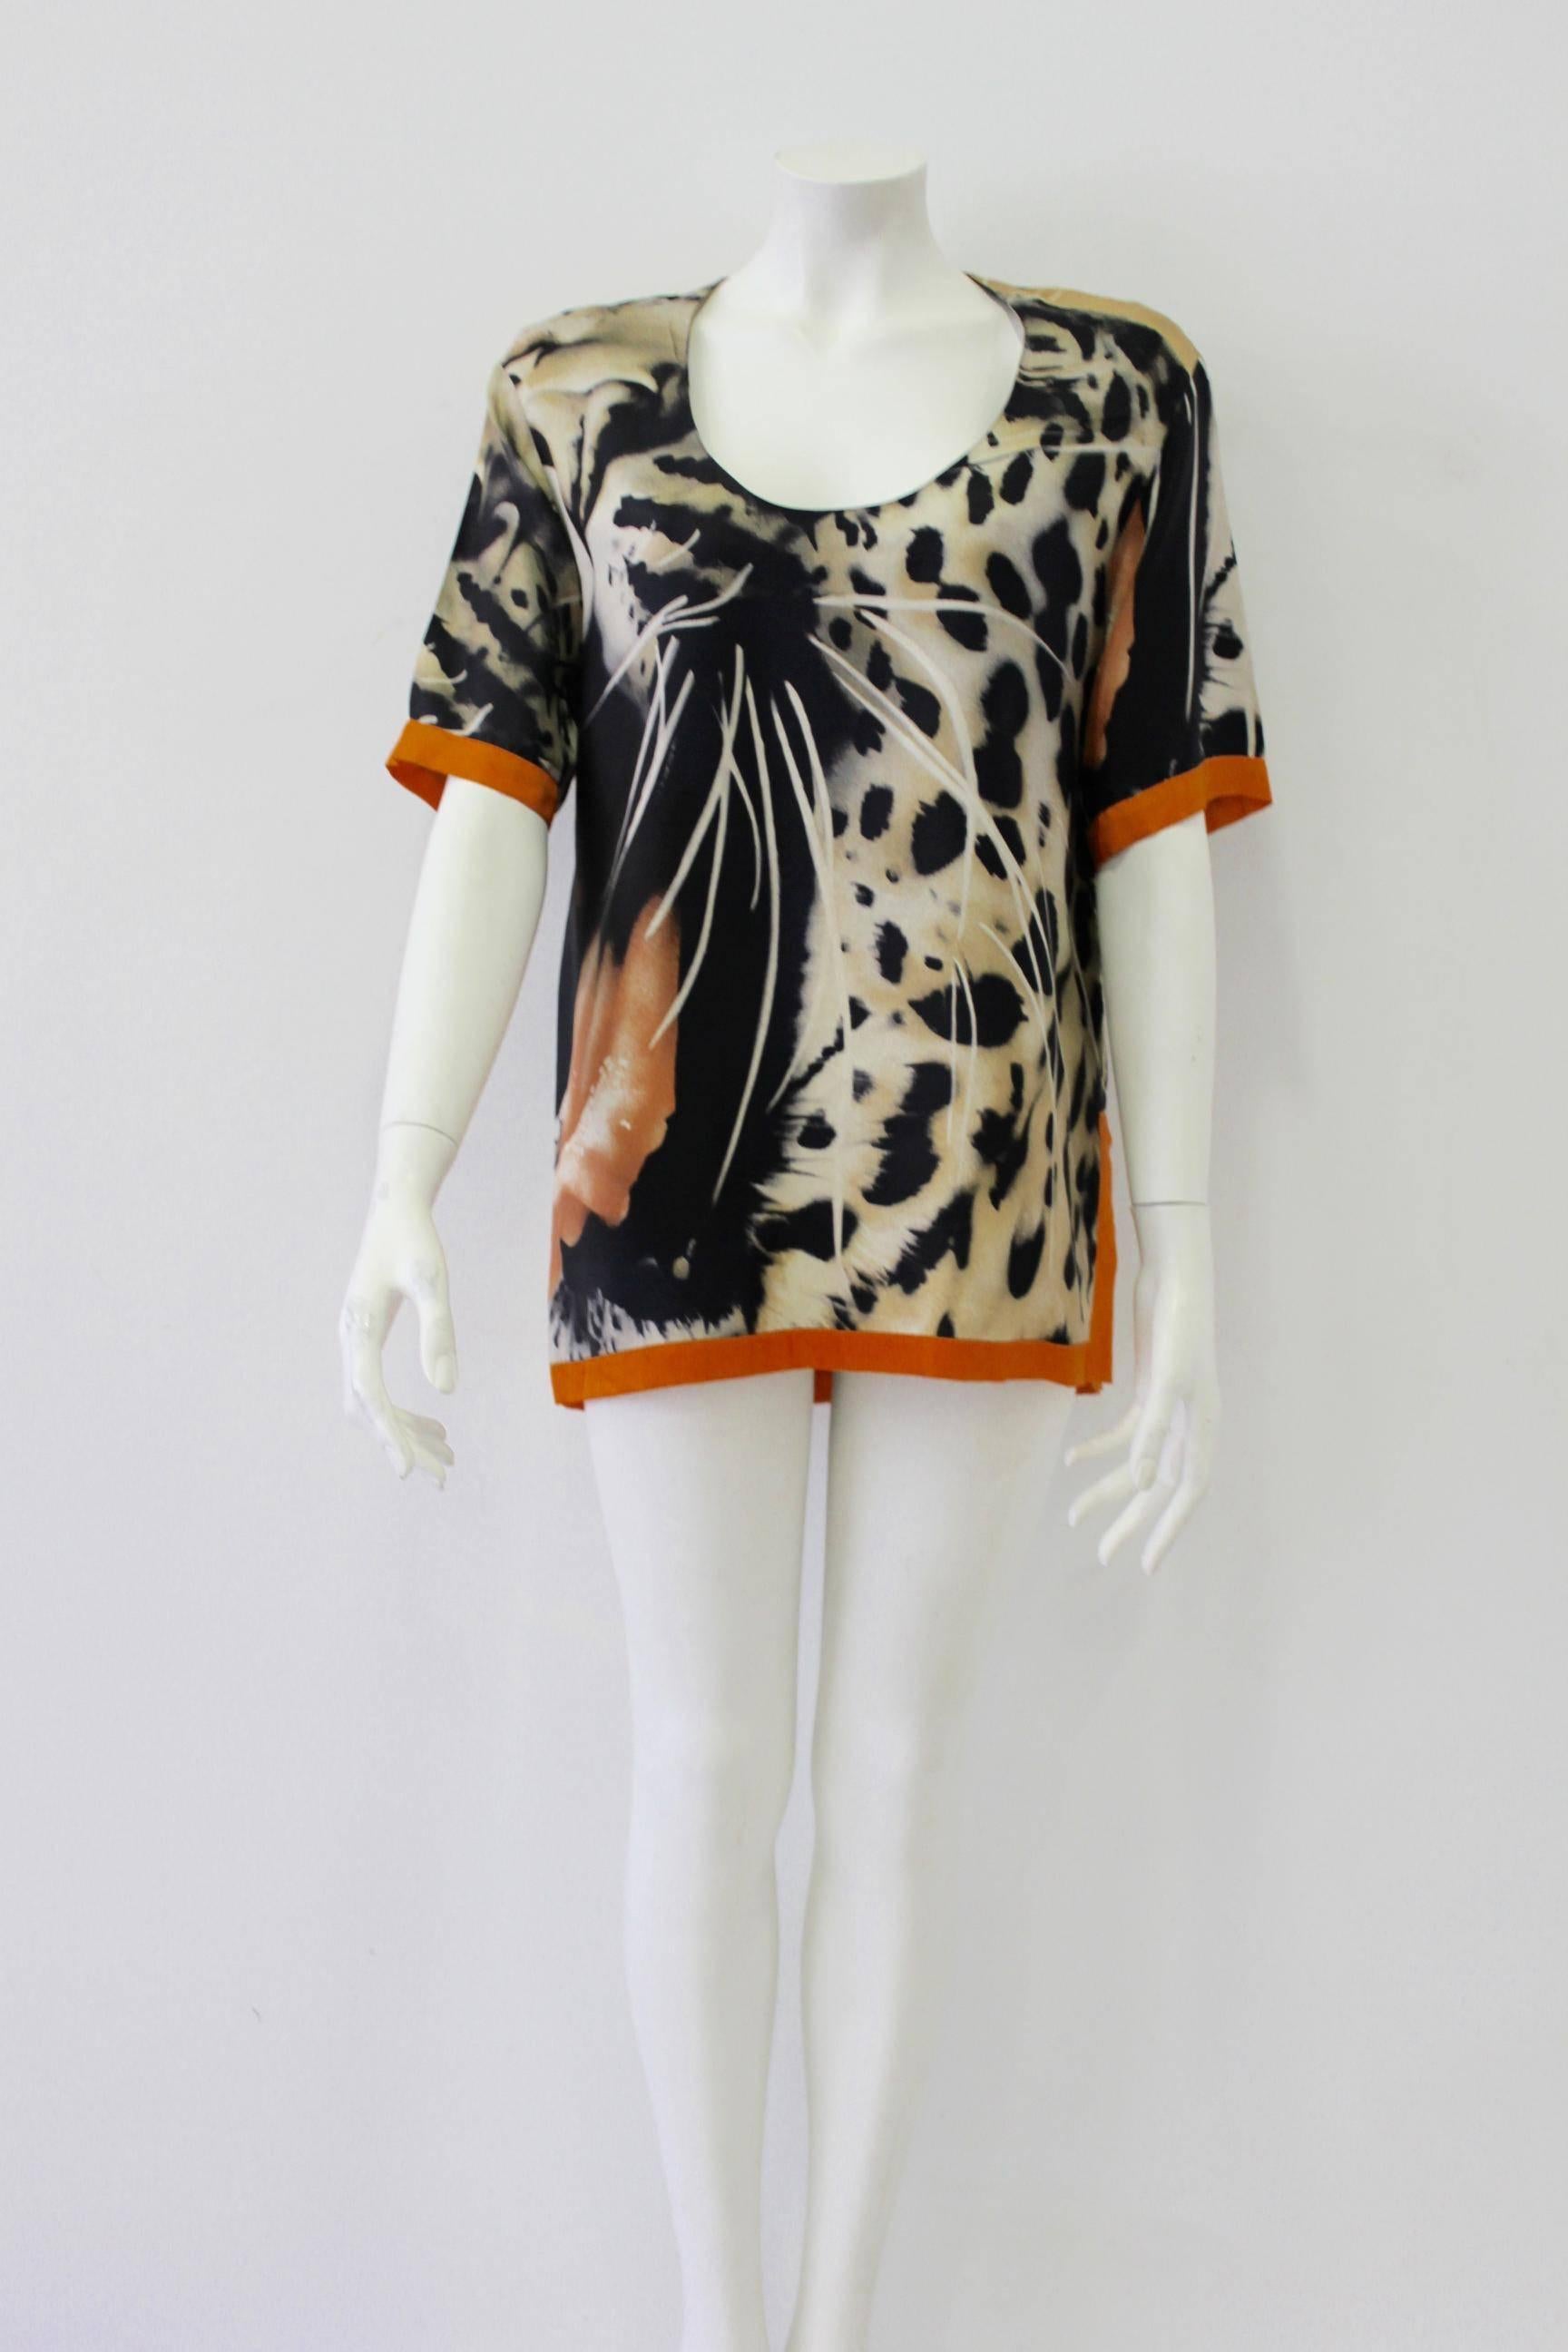 Unique Gianfranco Ferre Abstract Animal Print Silk Top with Orange Contrast Piping